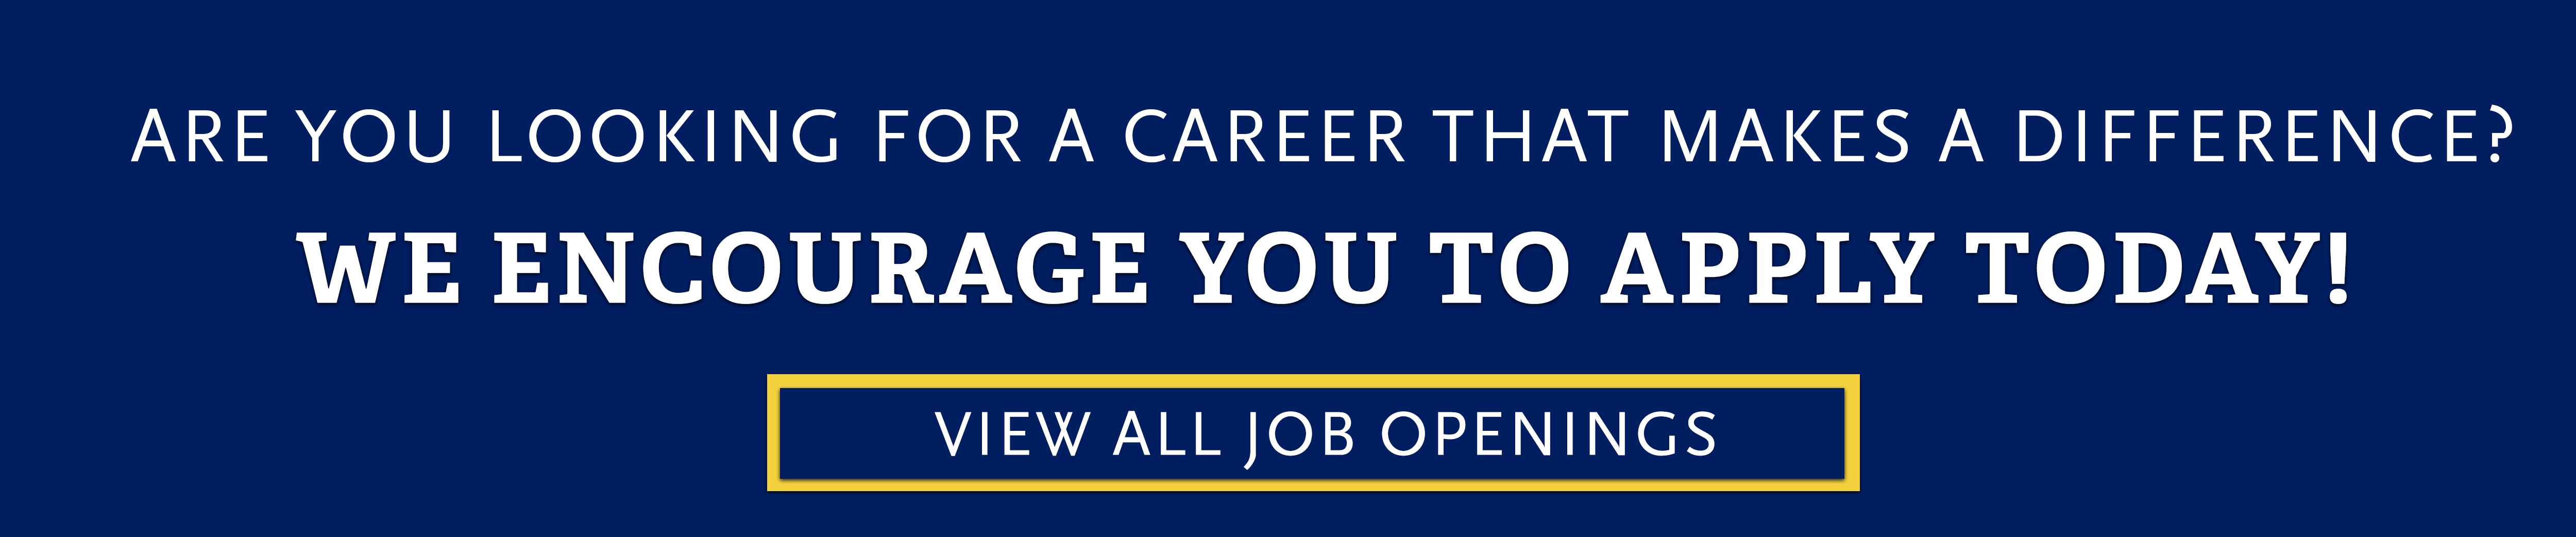 Are you looking for a career that makes a difference? We encourage you to apply today! View all job openings